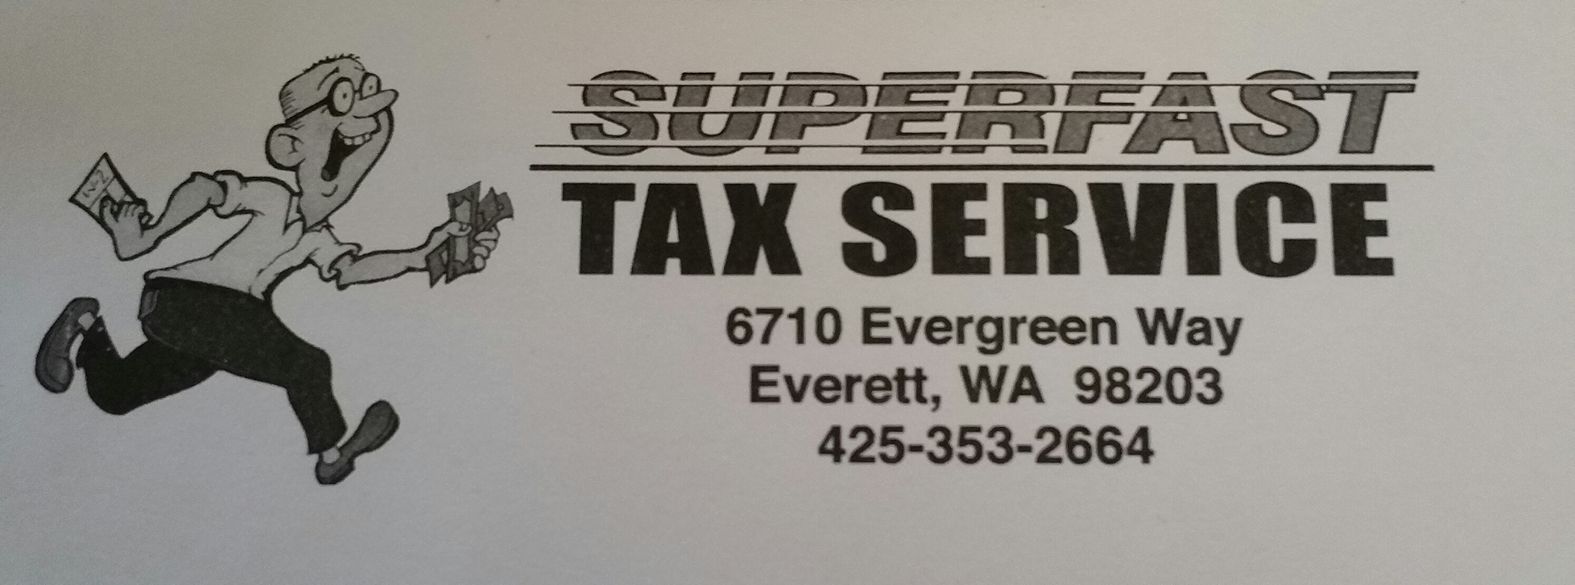 Superfast Tax Services